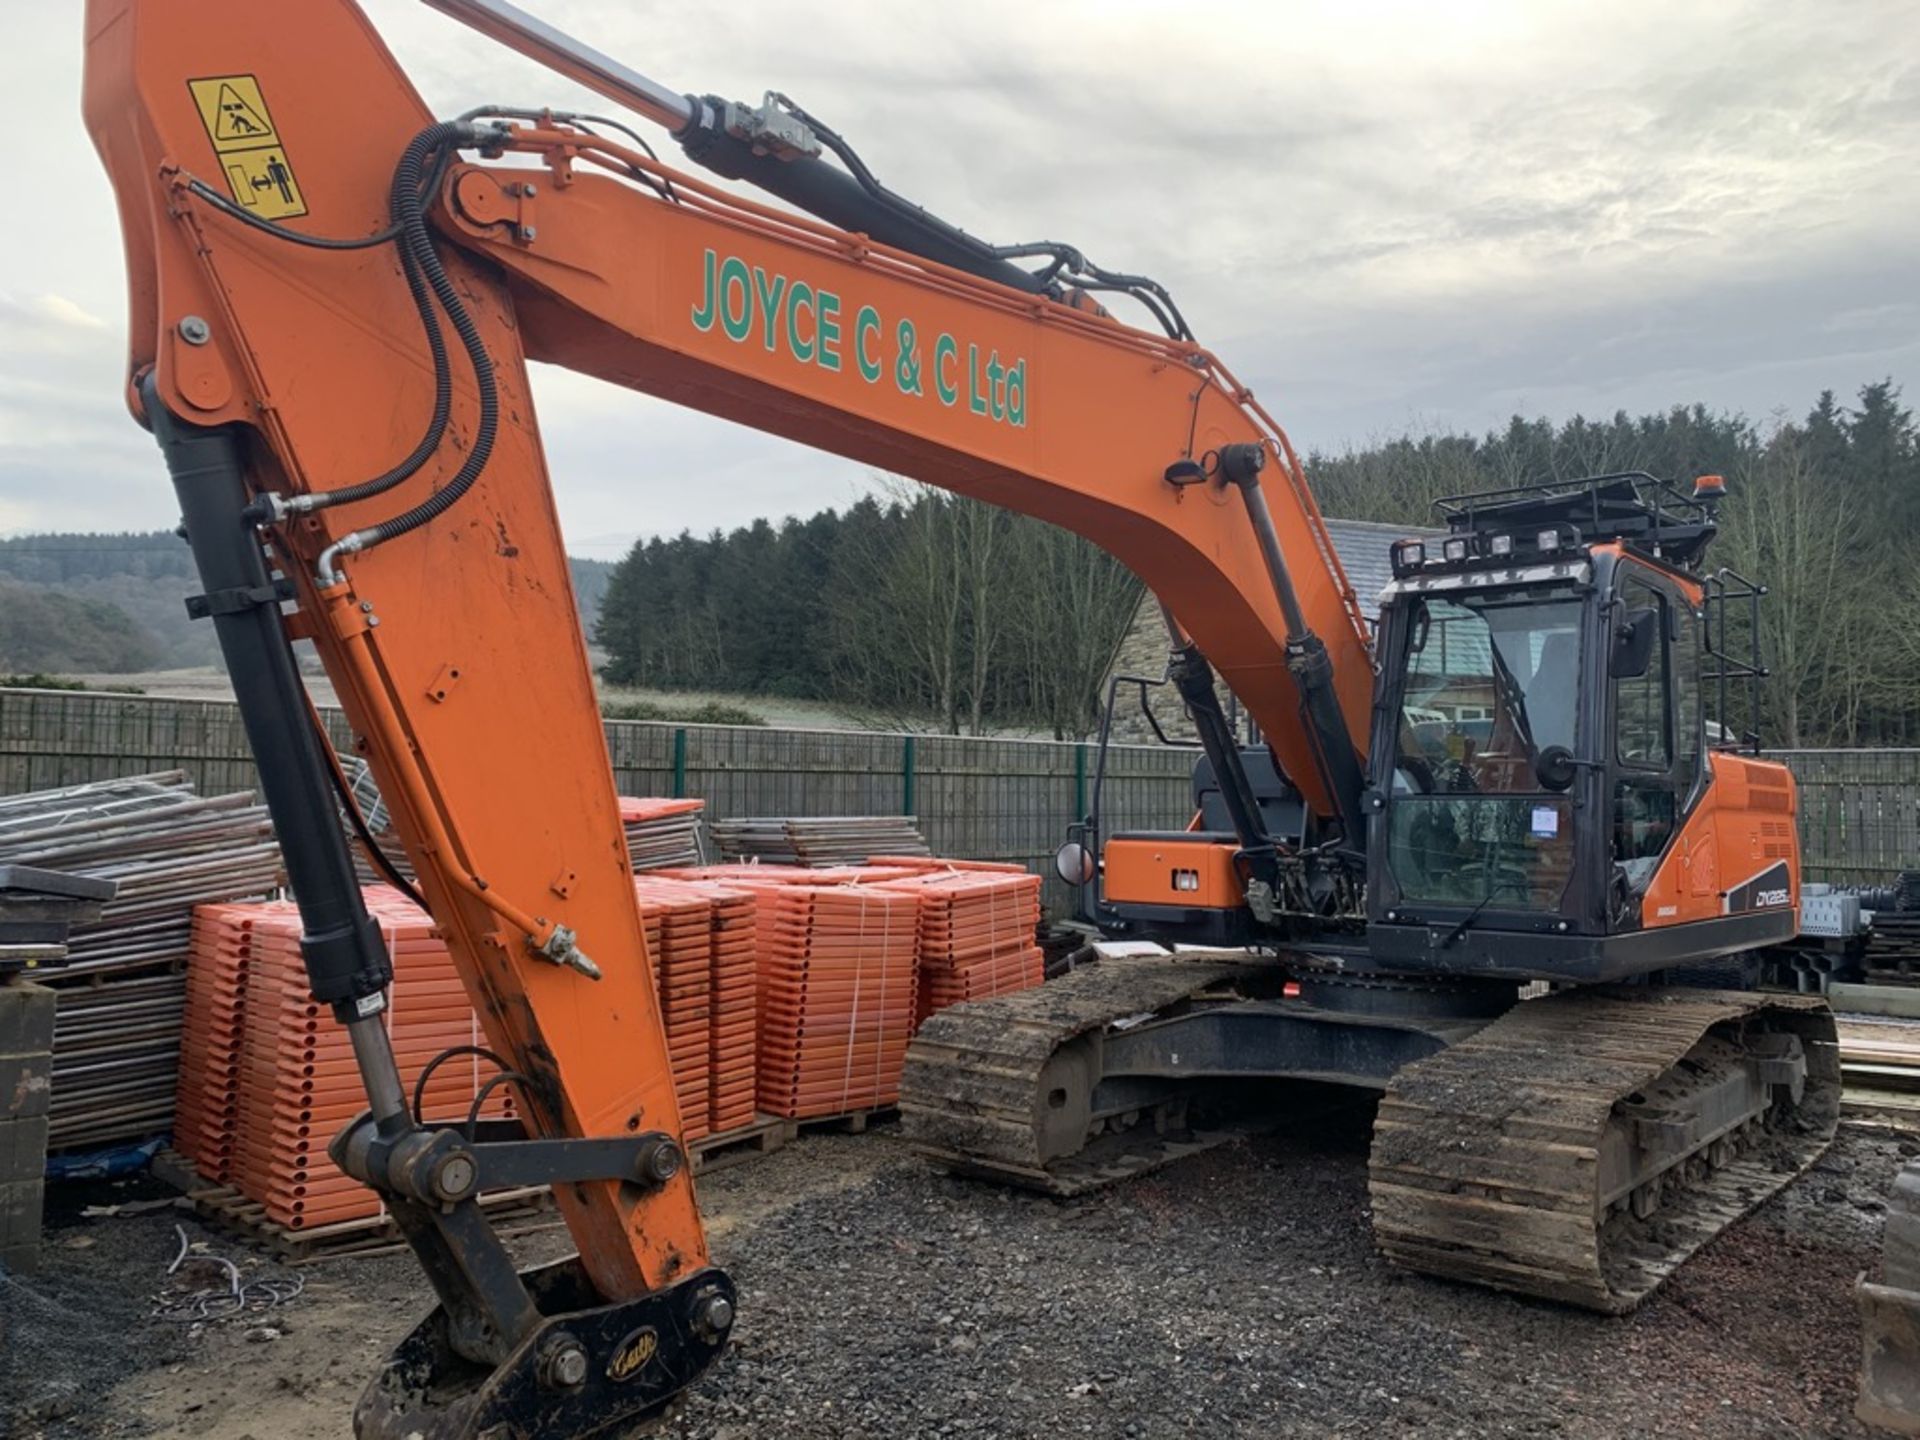 Doosan, DX225LC-6 22 Ton Excavator Serial No. DHCKEBBUKH0001593 Date of Manufacture: 2018 Piped with